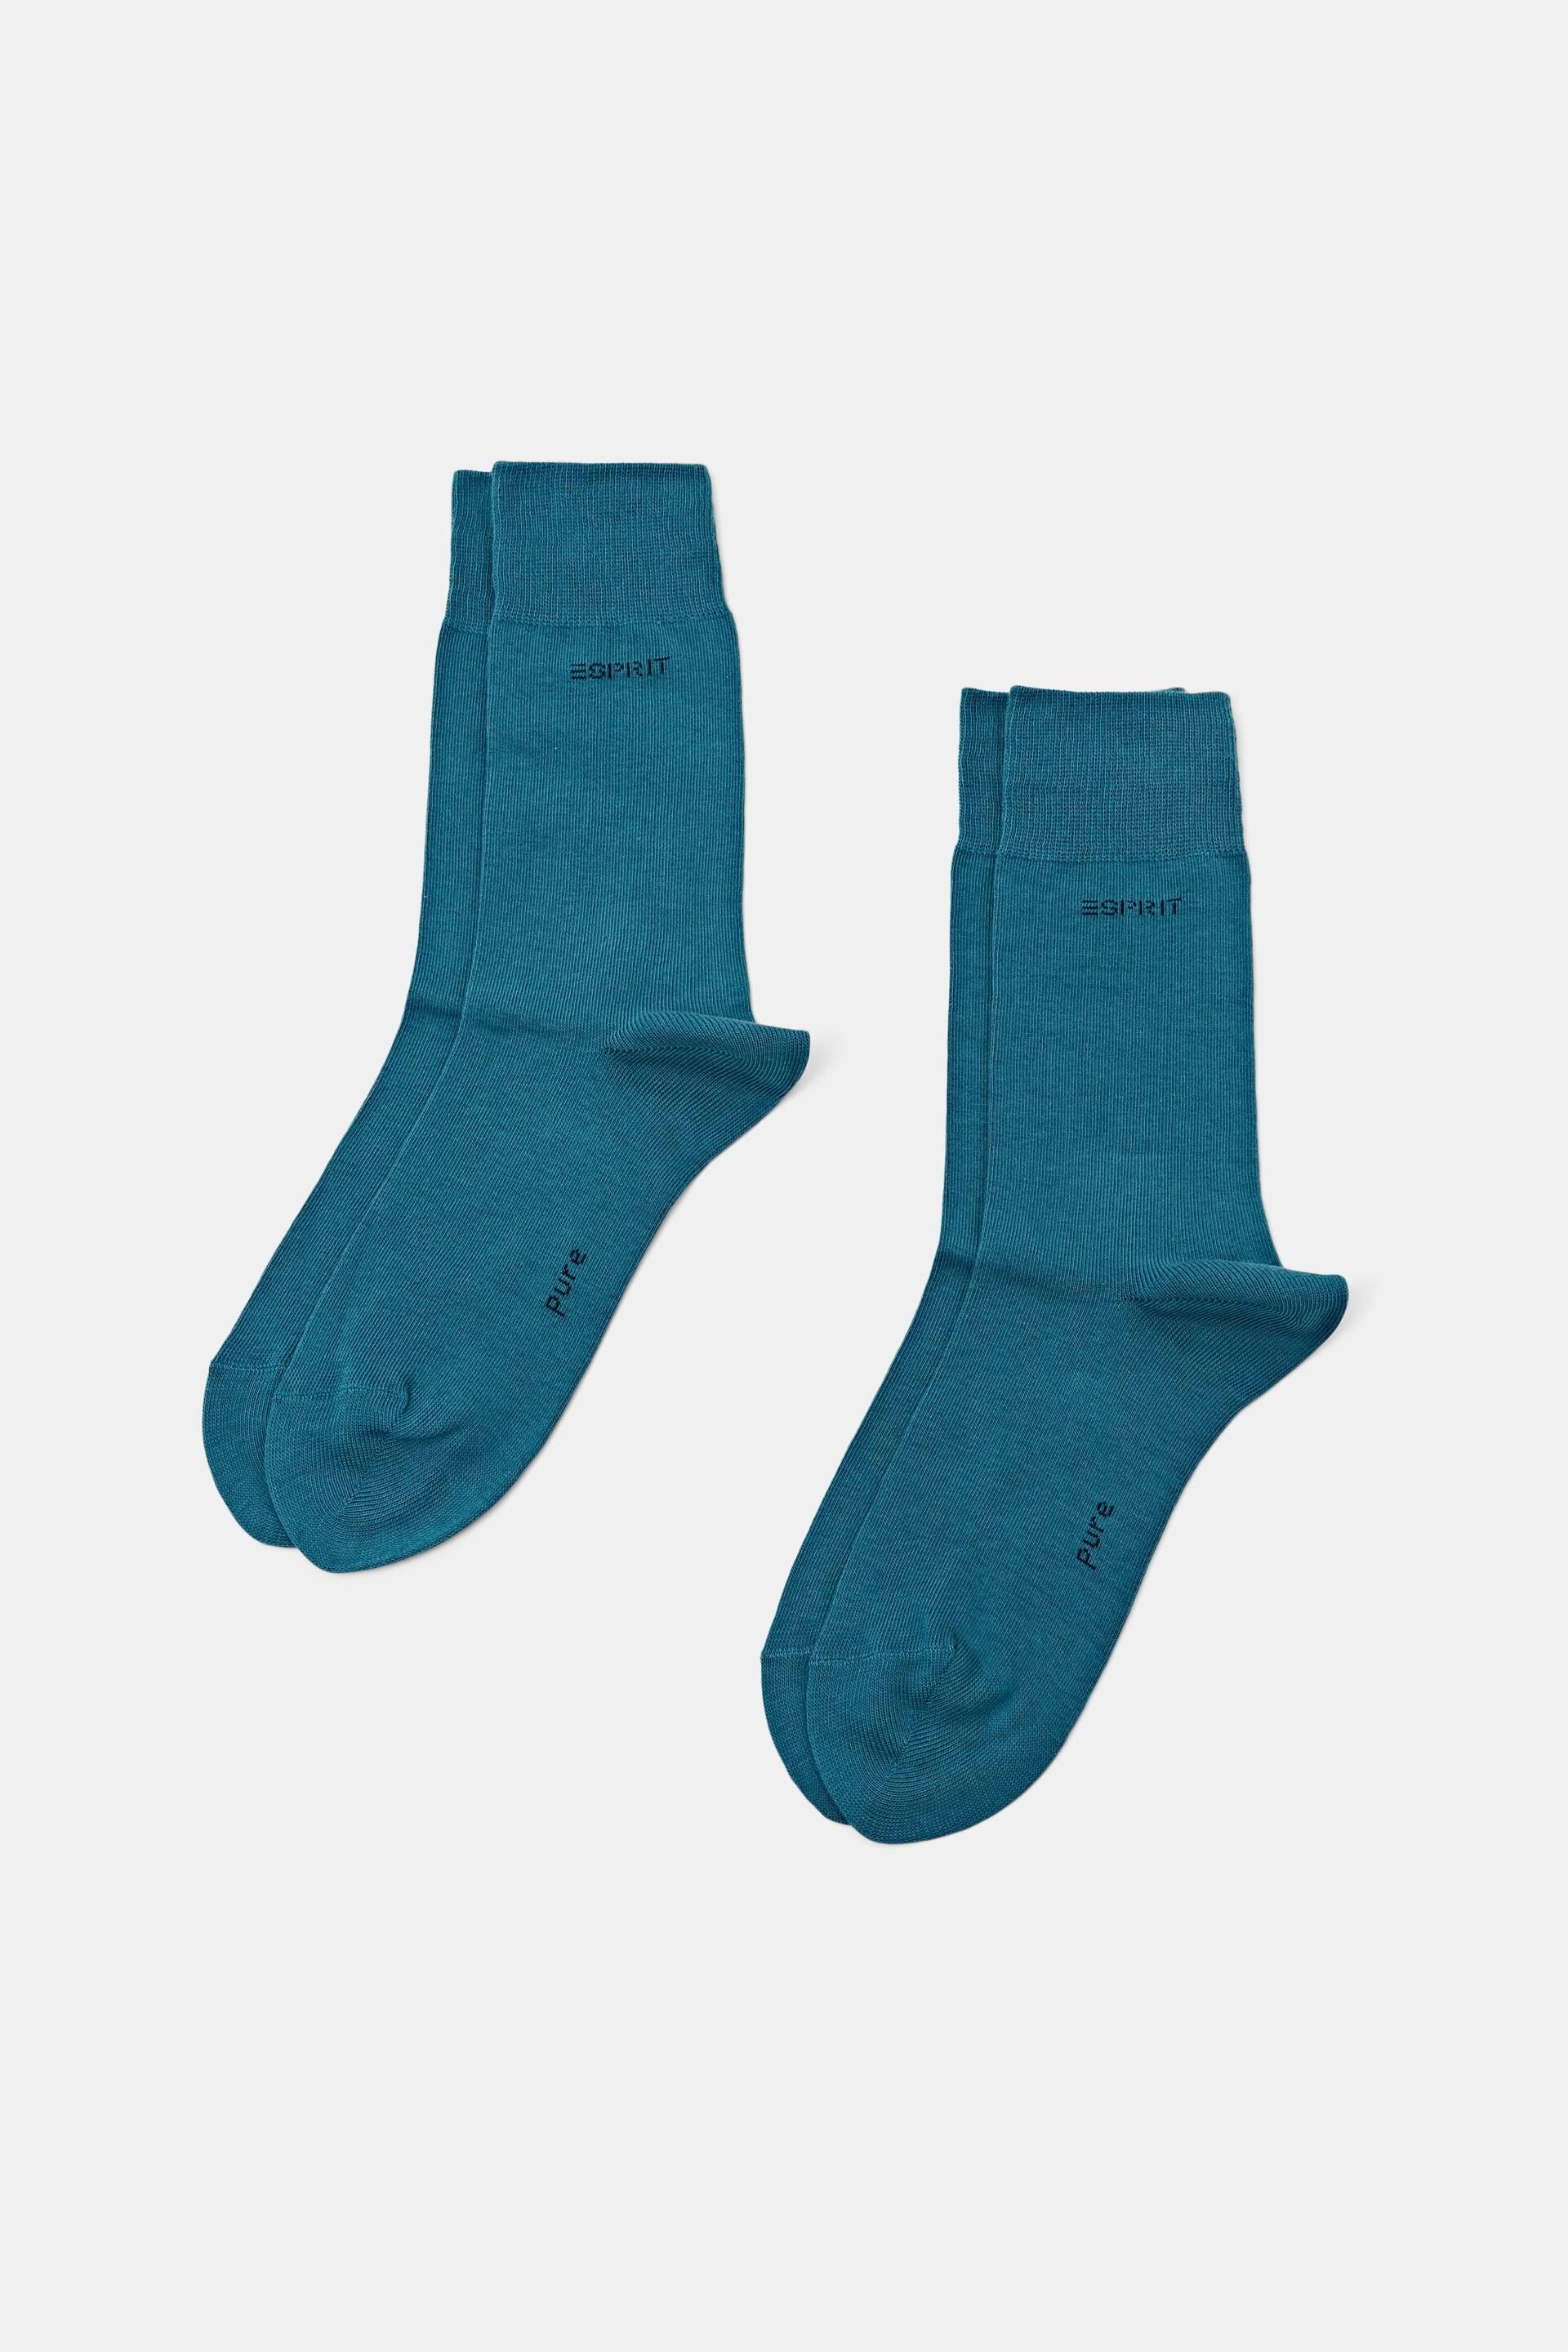 Esprit of blended made Double cotton socks organic pack